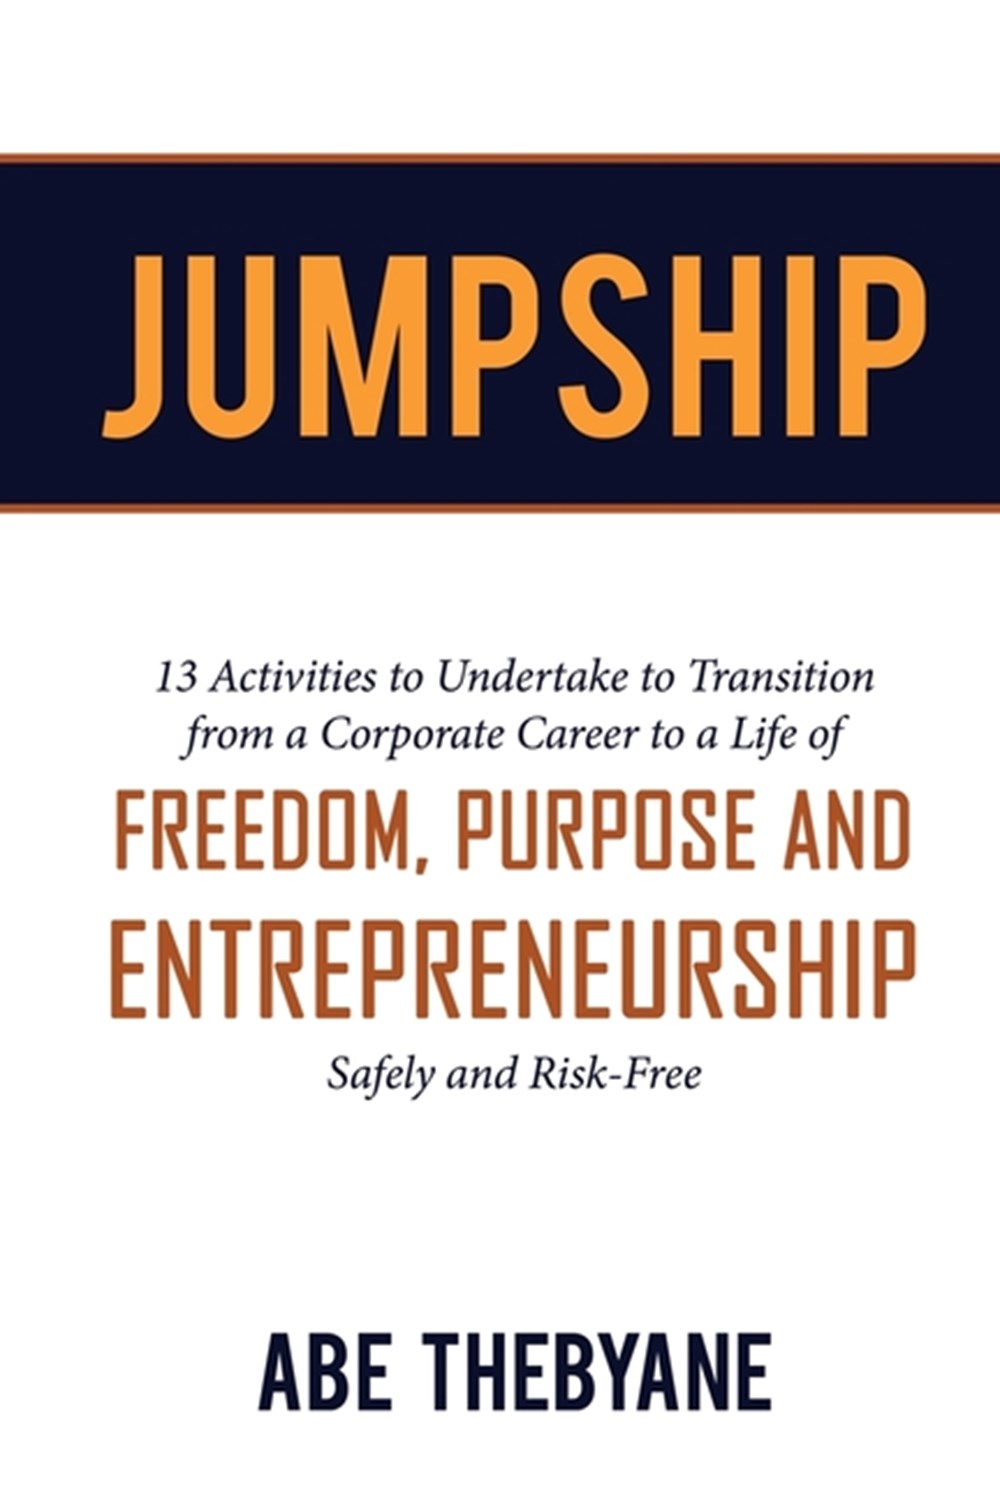 Jumpship 13 Activities to Undertake to Transition from a Corporate Career to a Life of FREEDOM, PURP